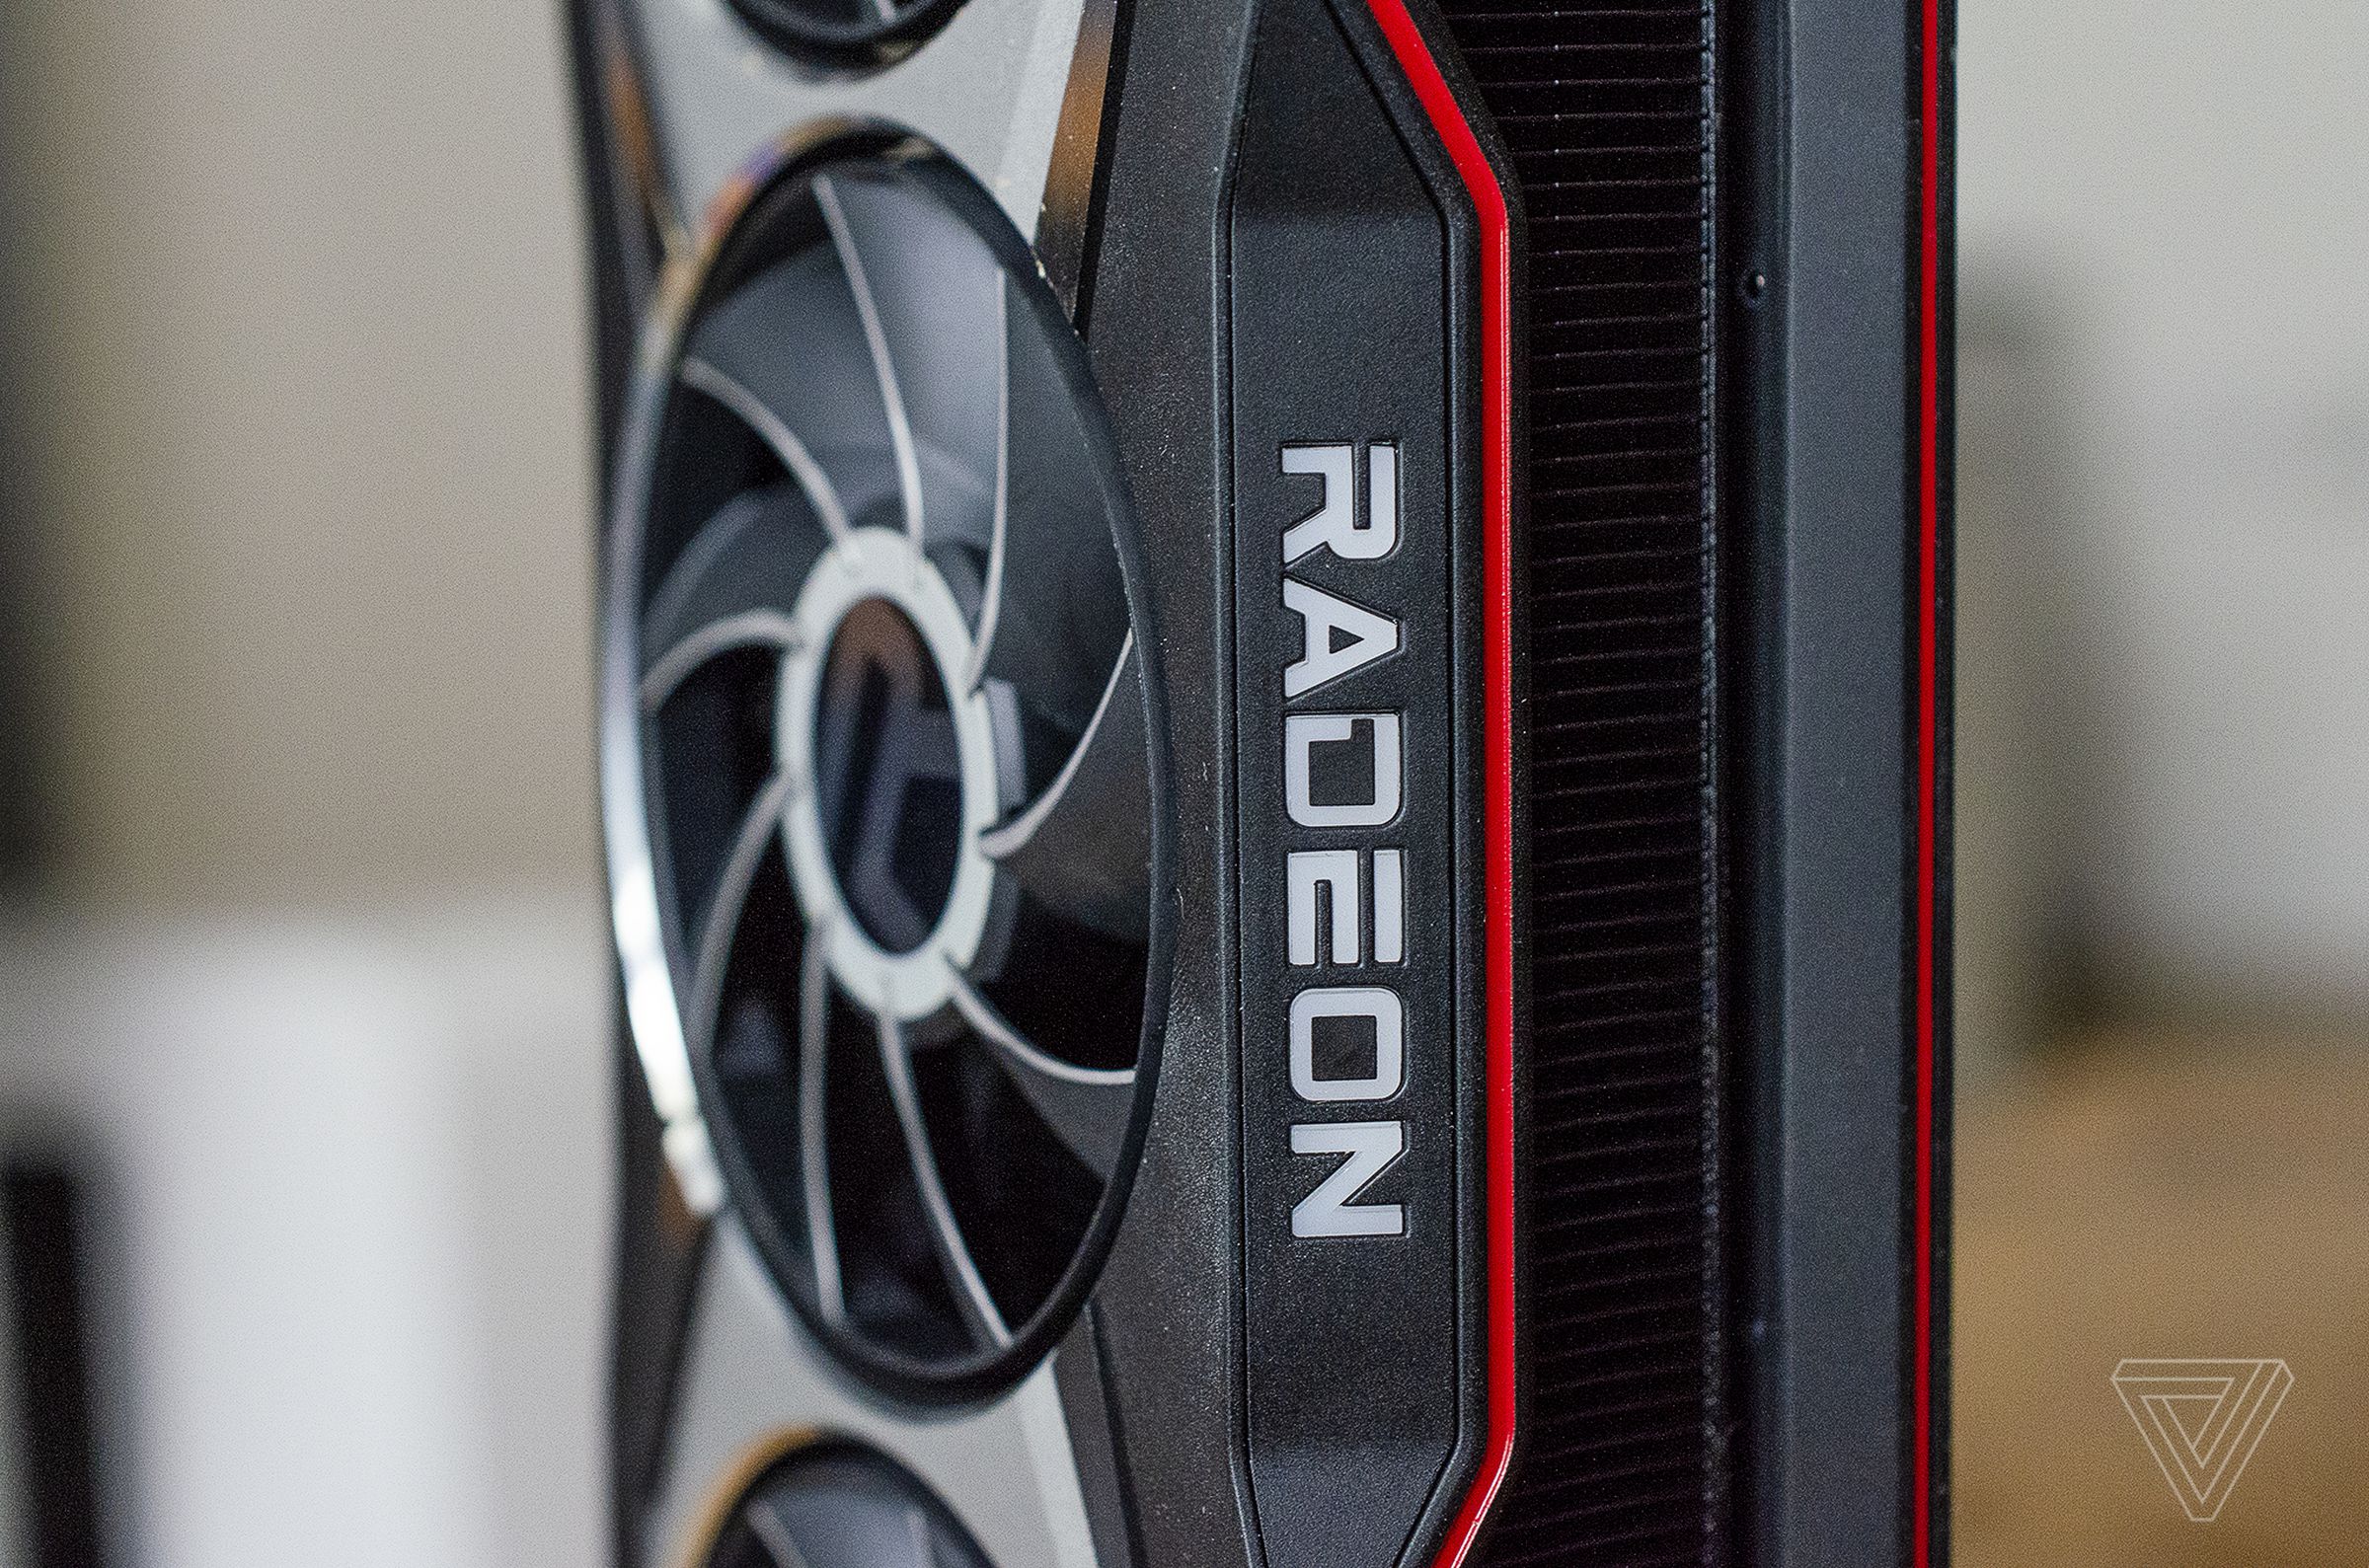 The Radeon logo lights up in red LEDs.